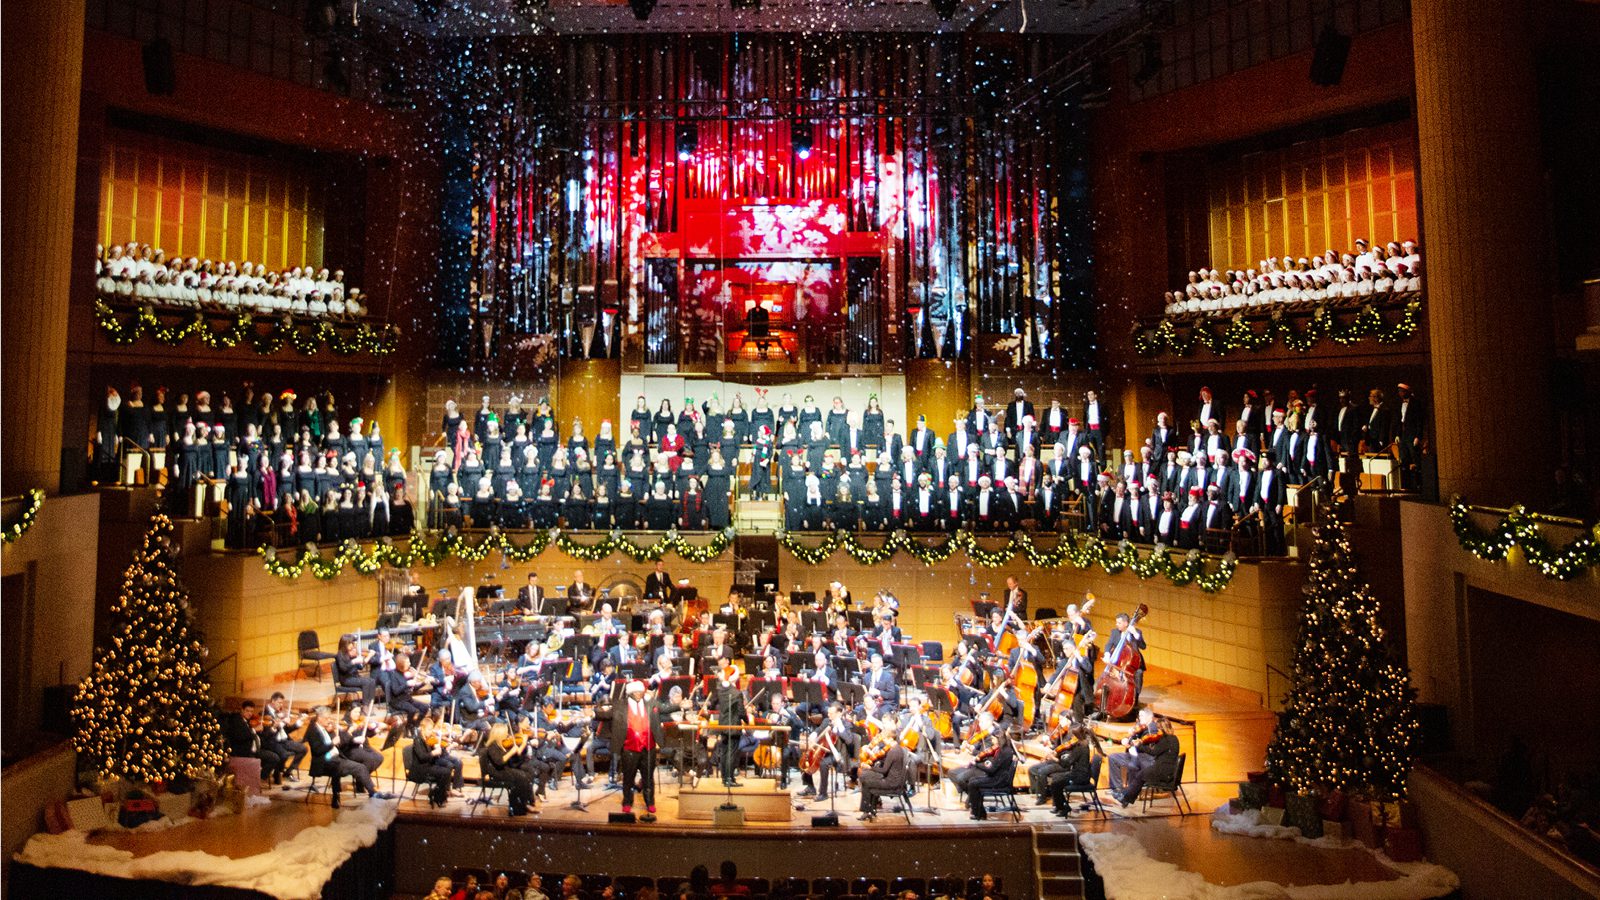 The Dallas Symphony Orchestra will present Hollywood Holidays at the Meyerson Symphony Center this weekend, featuring classic silver screen holiday music.